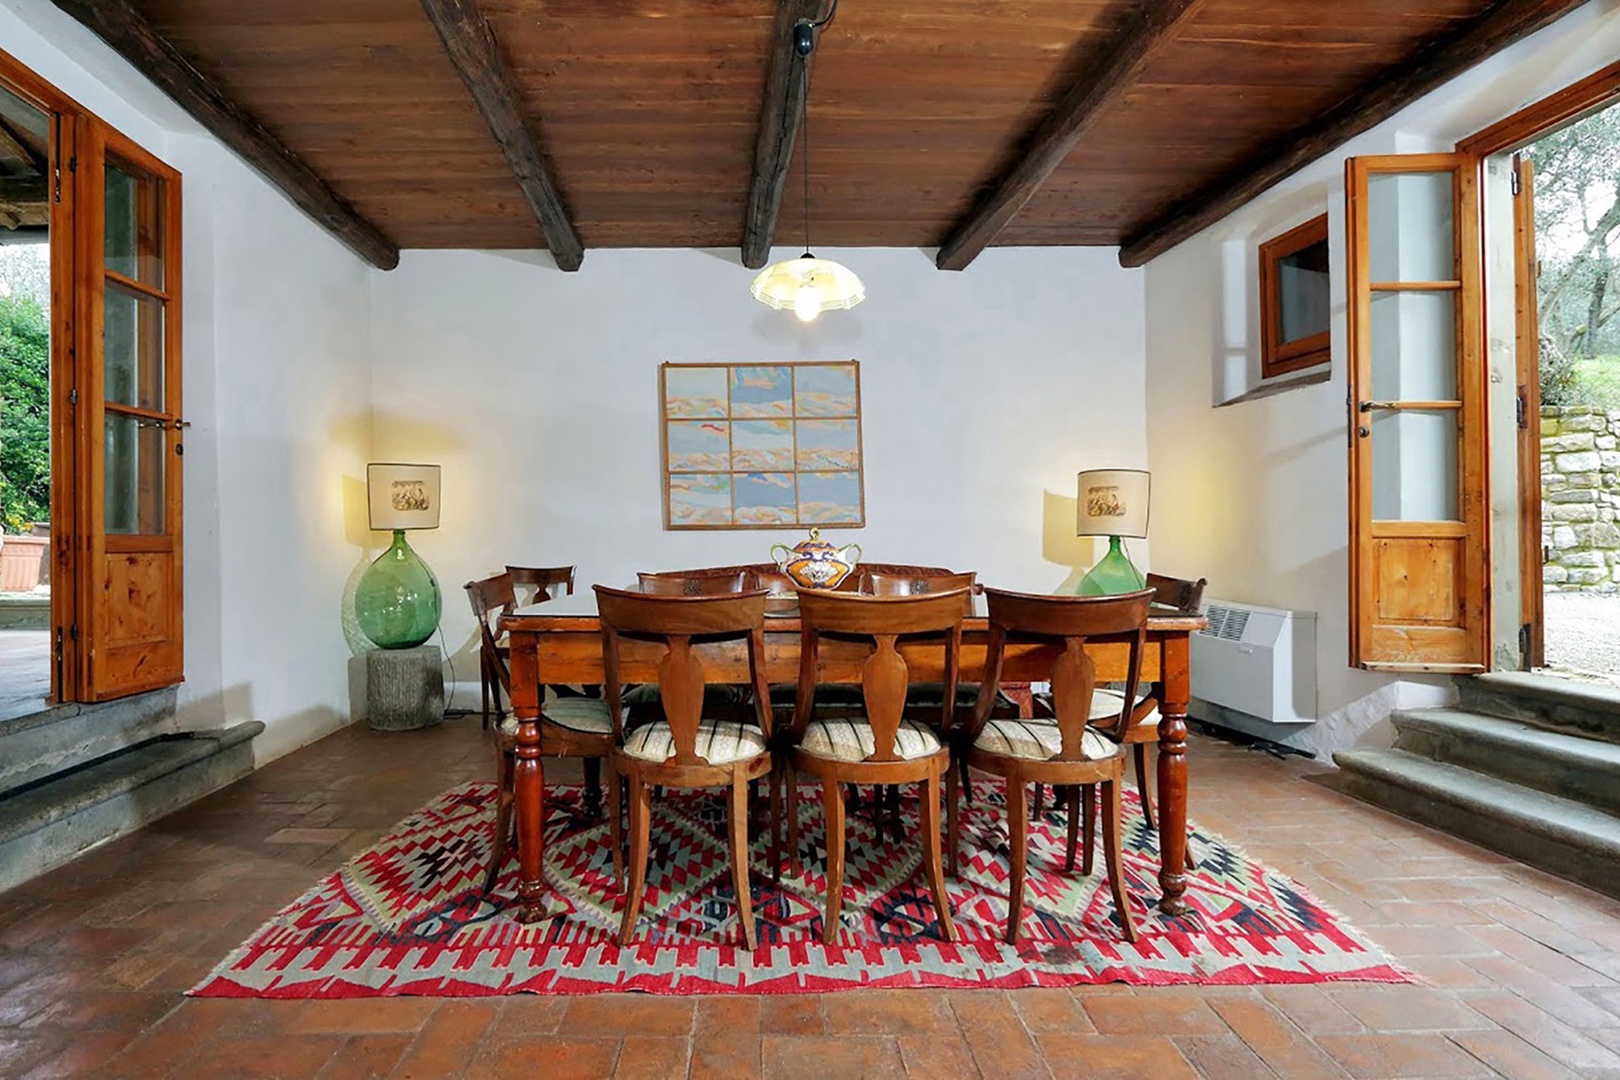 The country style dining room at Villa Poggio seats eight.